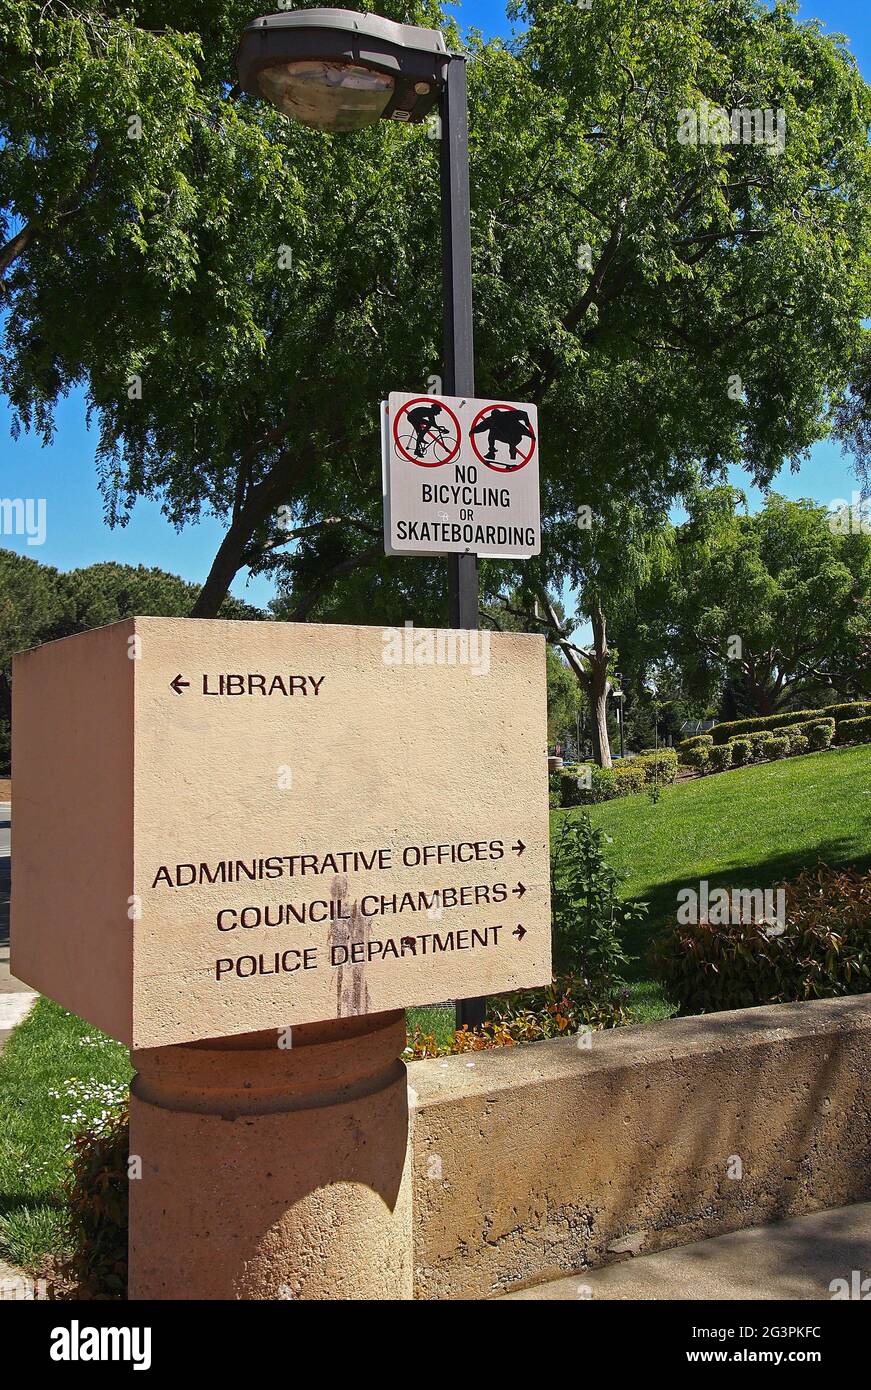 Union City directions for Library, Administrative offices, Council chambers, police department and no skateboarding or bicycling signs, California Stock Photo